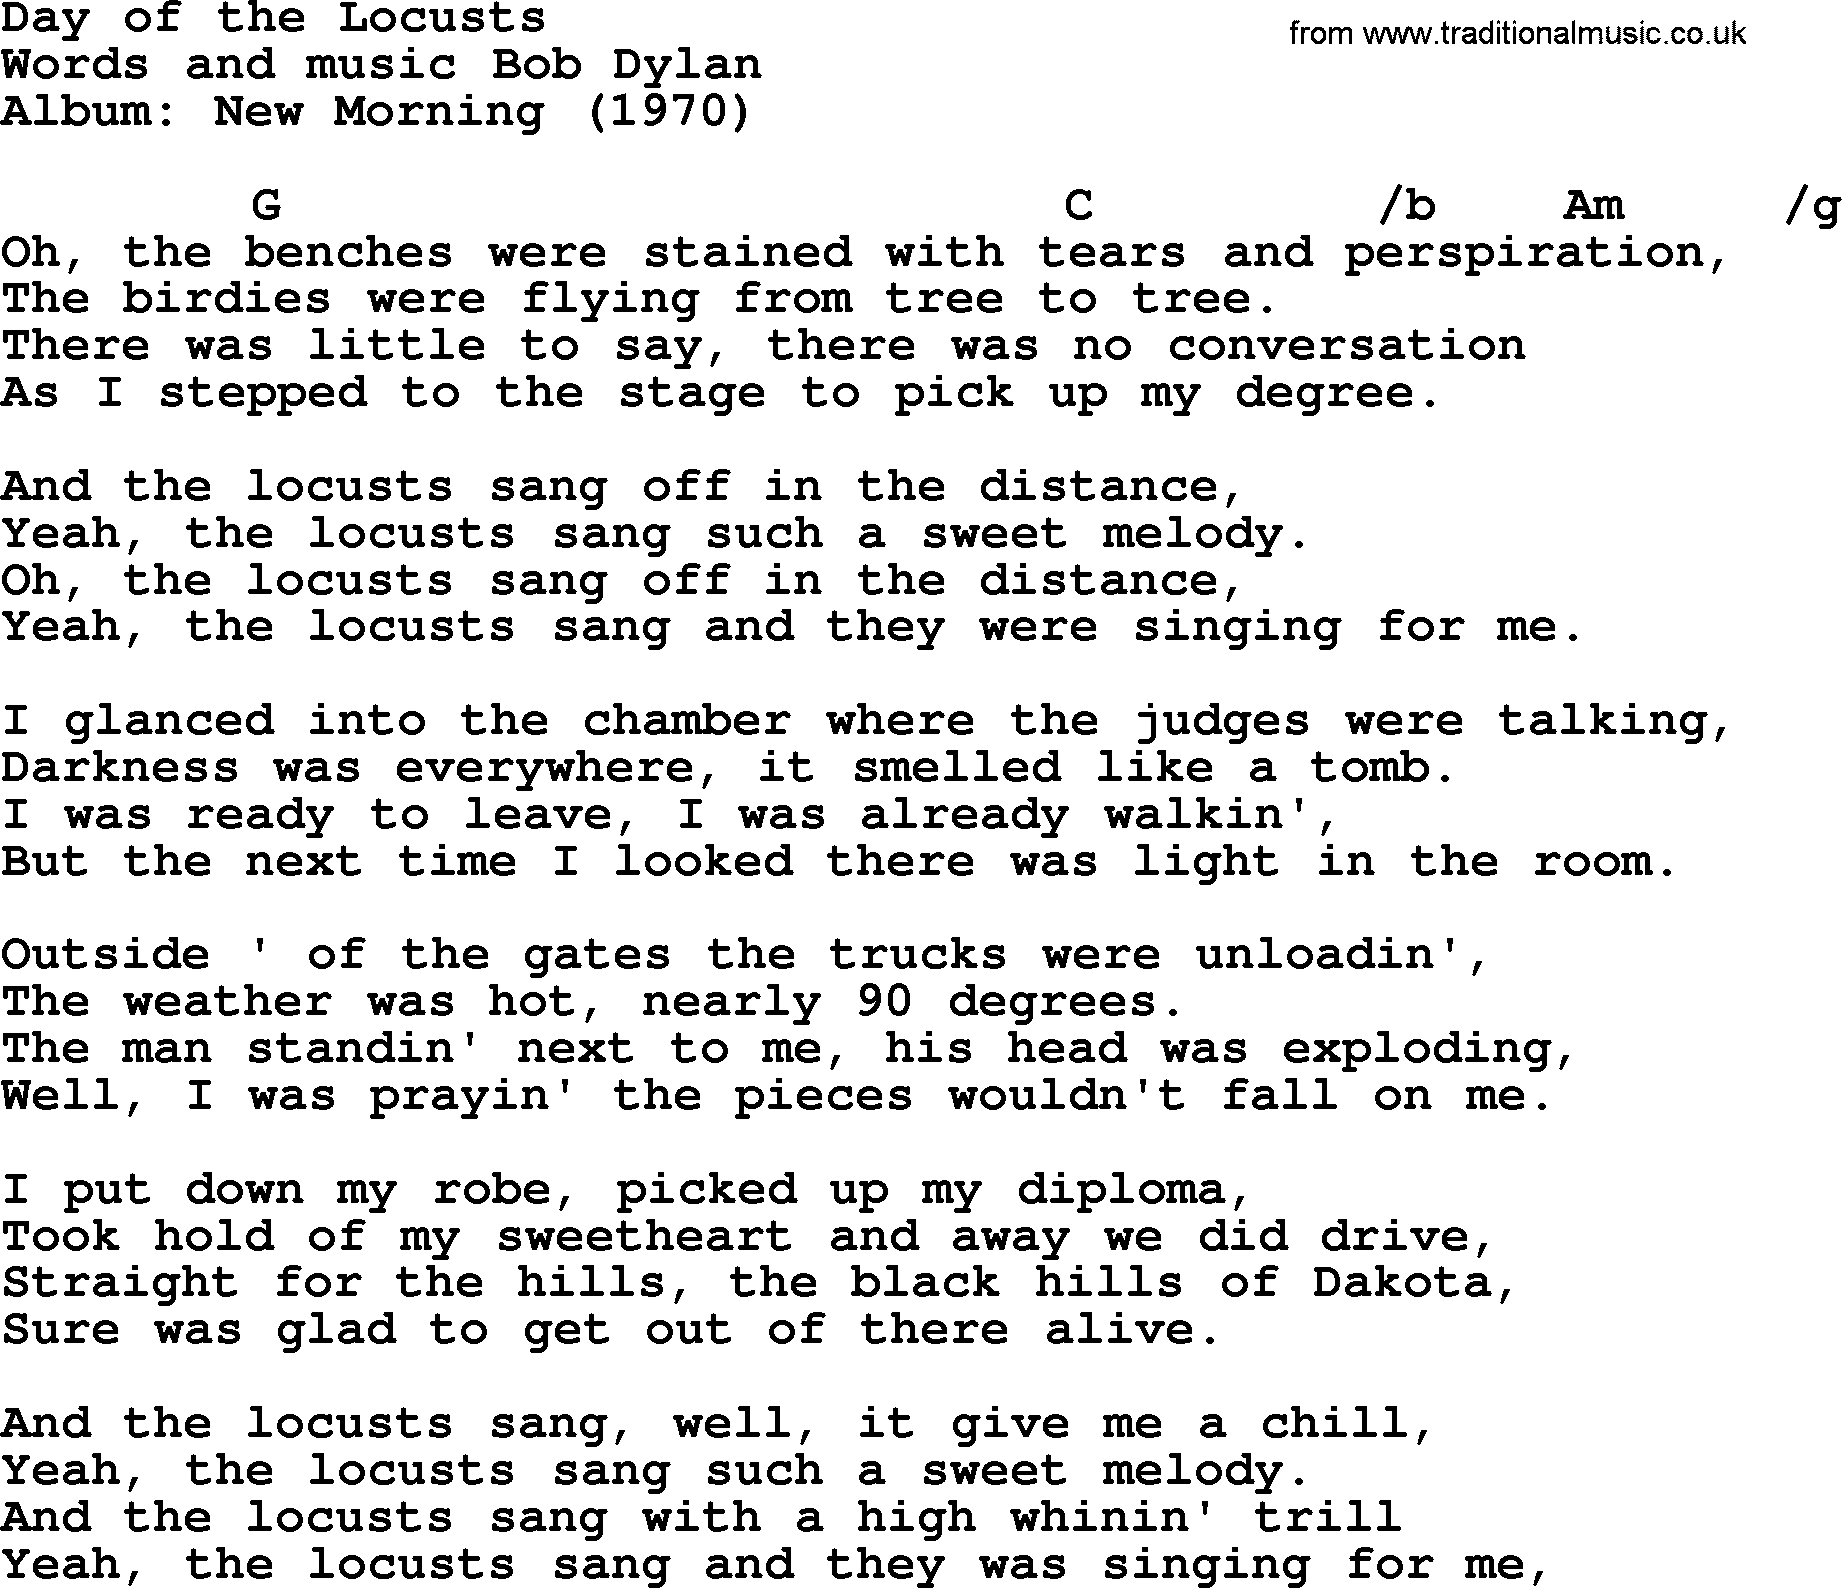 Bob Dylan song, lyrics with chords - Day of the Locusts